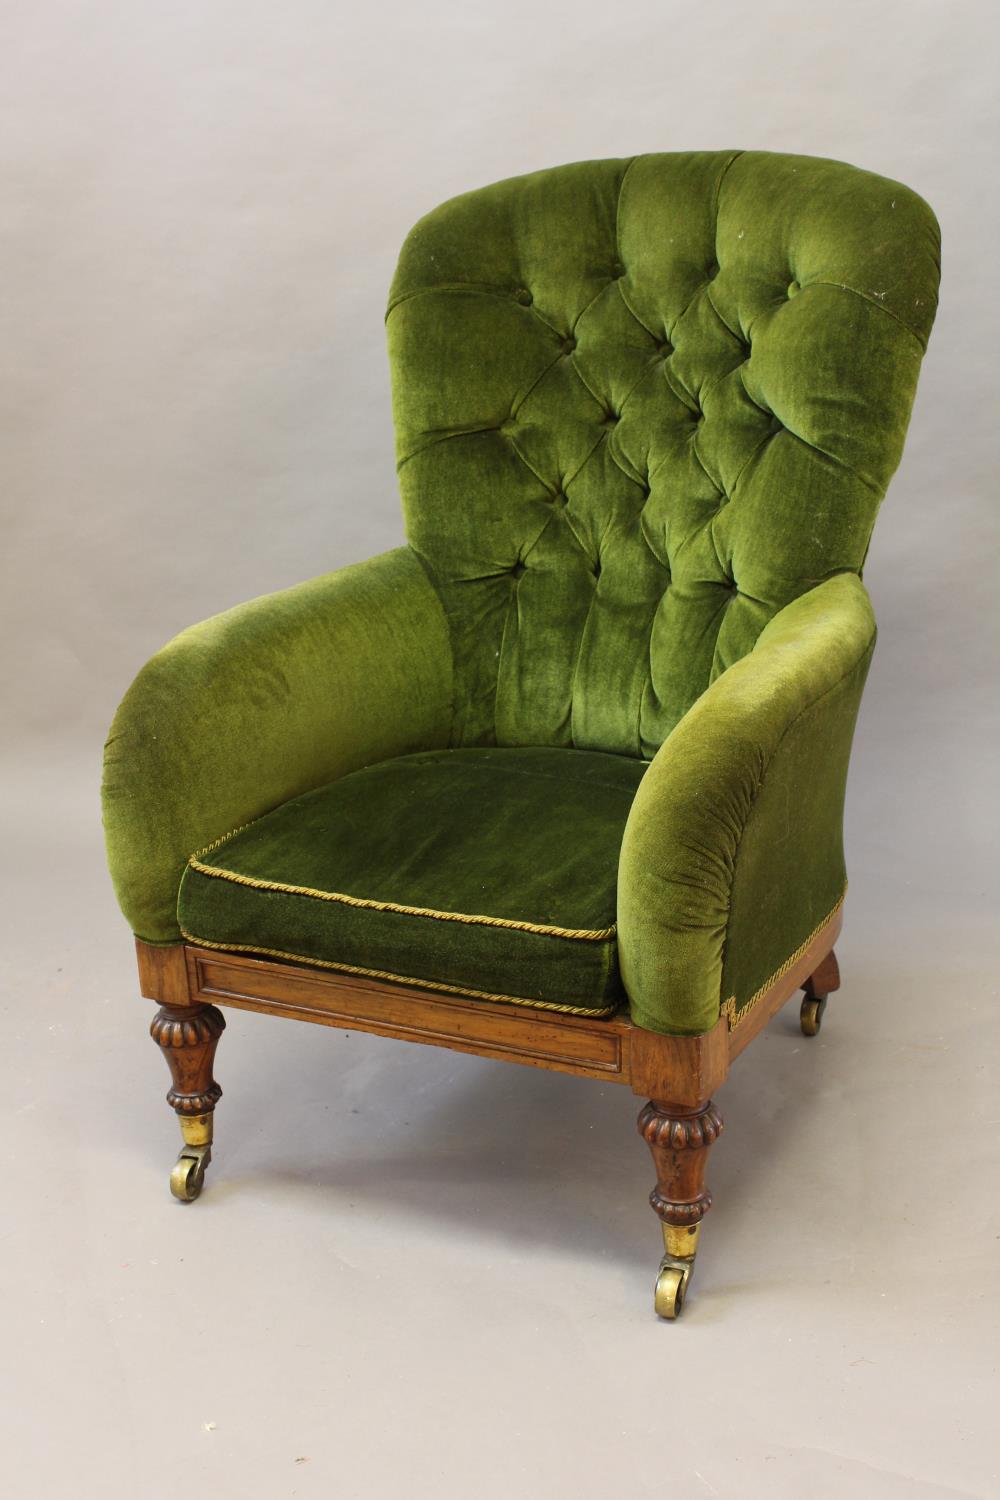 A REGENCY ROSEWOOD UPHOLSTERED LIBRARY CHAIR, with button upholstered back and low arms above a